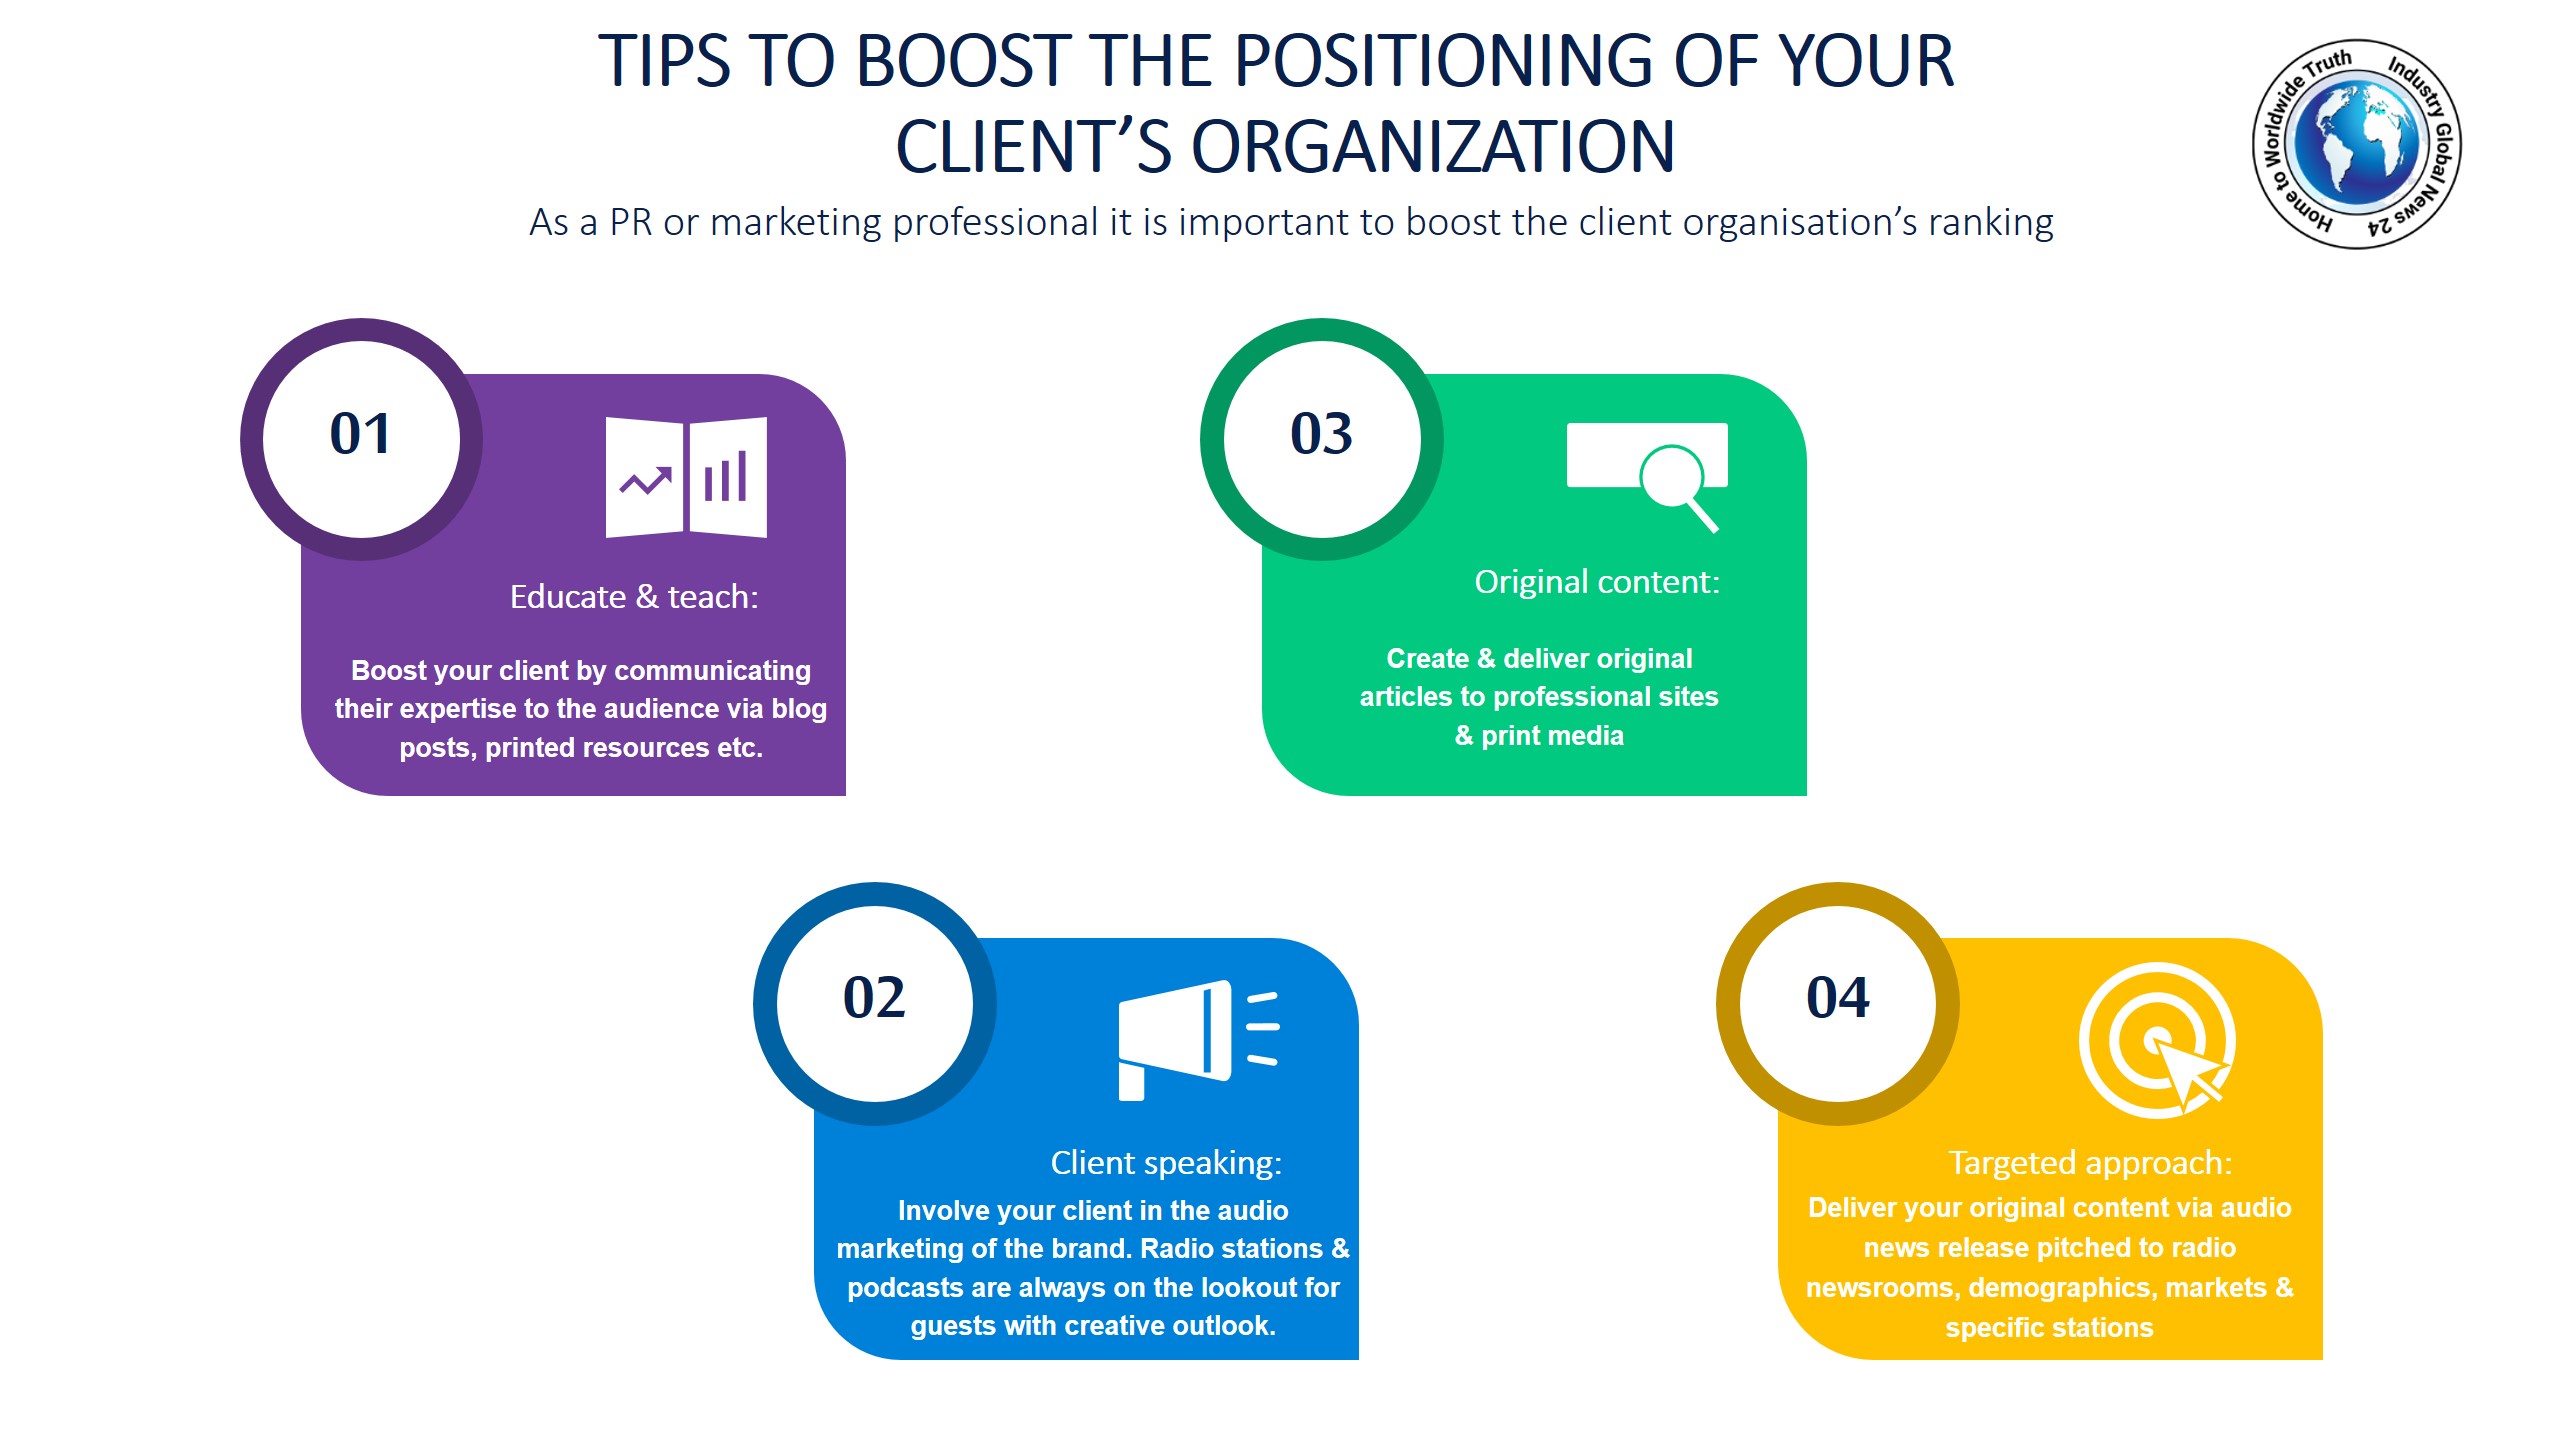 Tips to boost the positioning of your client’s organization